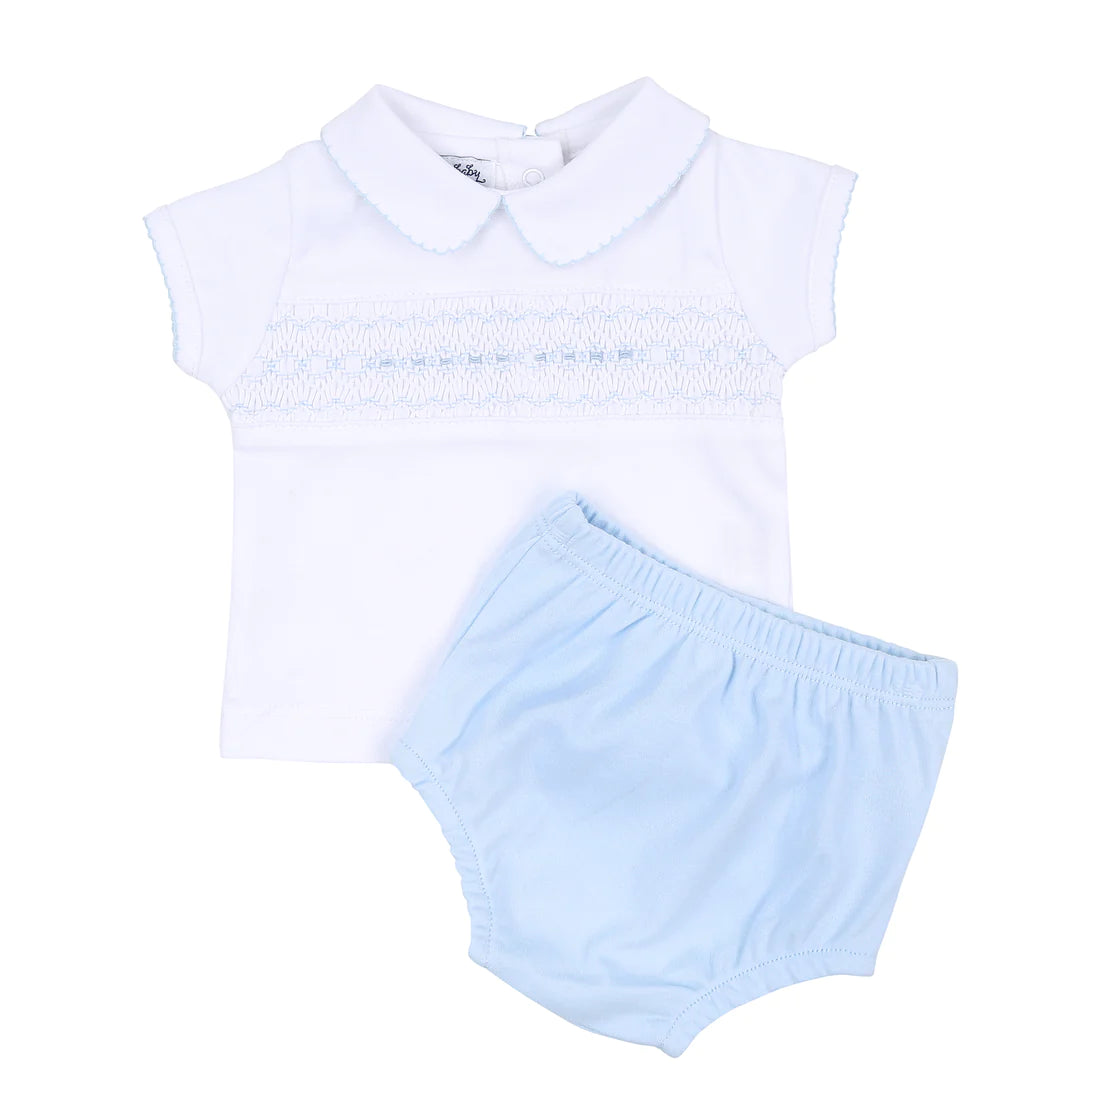 Hailey and Harry Smocked Collared Diaper Cover Set in Light Blue